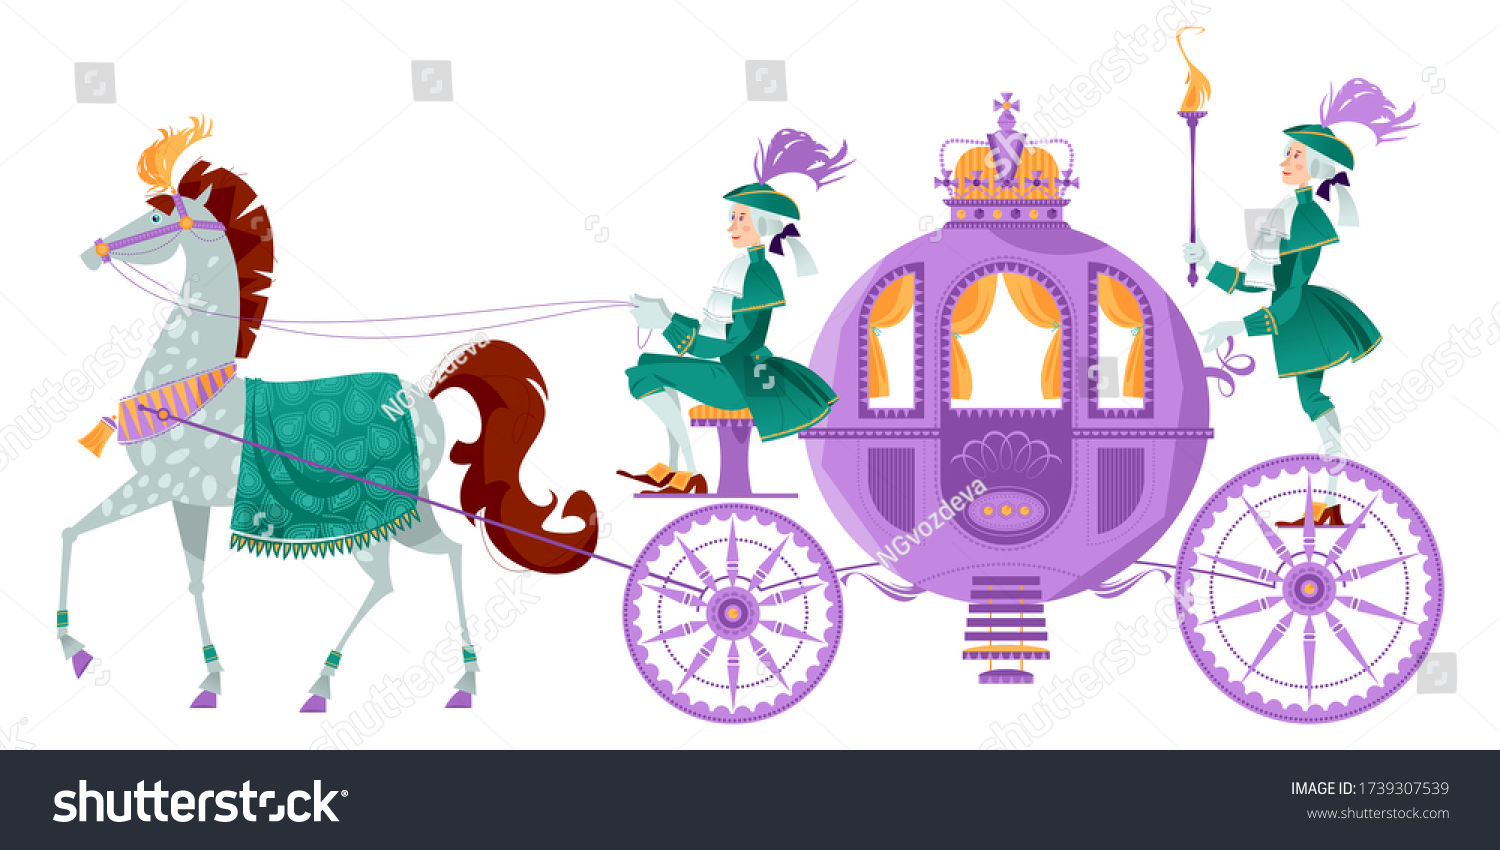 SVG of Princess Fantasy Carriage with Coachman and a Horse. Vector illustration. svg